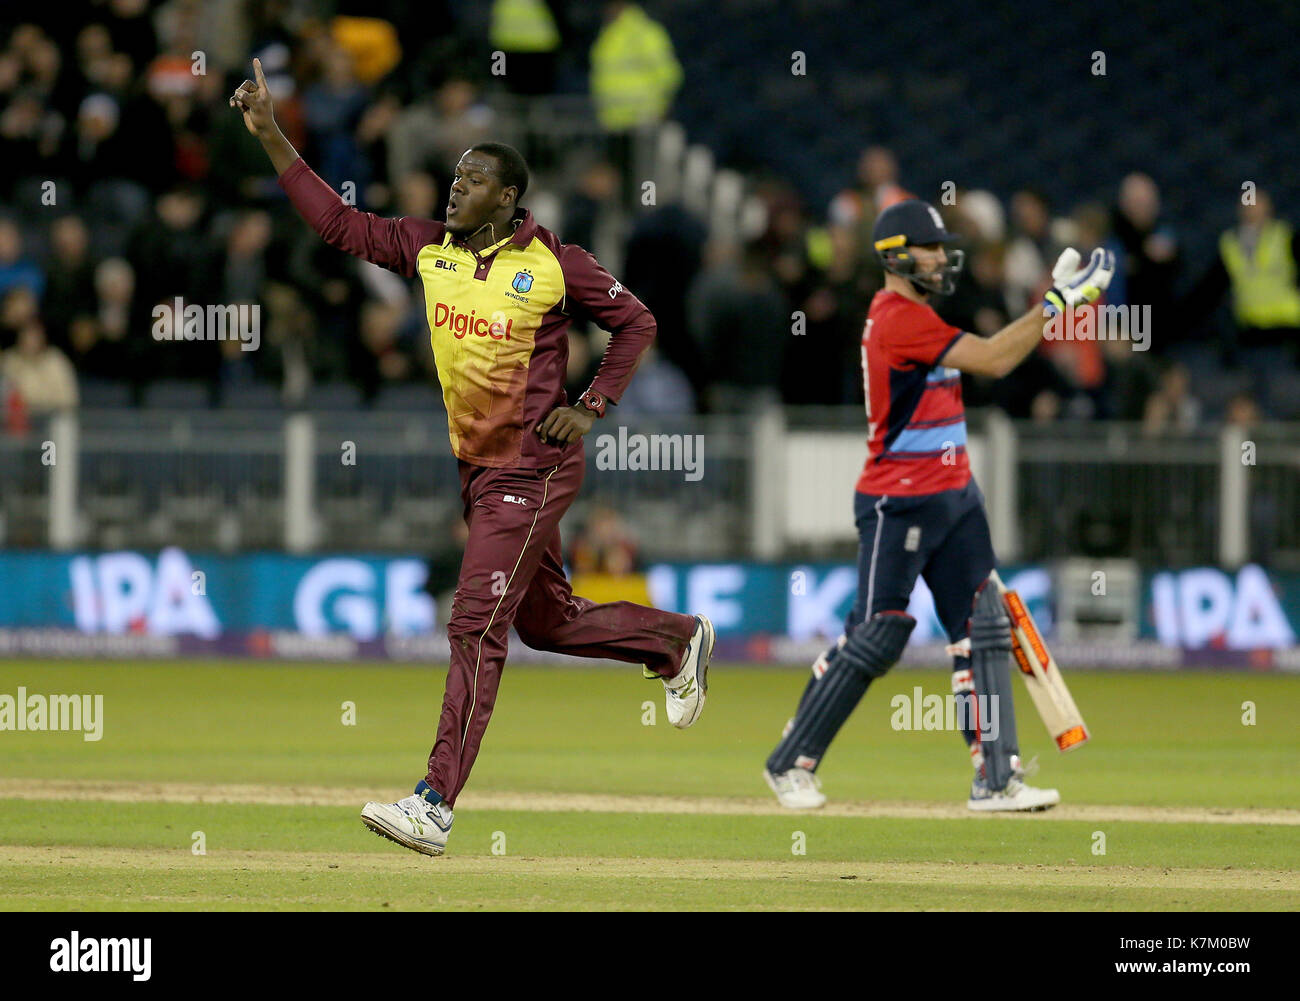 West Indies Carlos Brathwaite celebrates after taking the wicket of England's Liam Plunkett to win the NatWest T20 match at the Emirates Riverside, Durham. Stock Photo